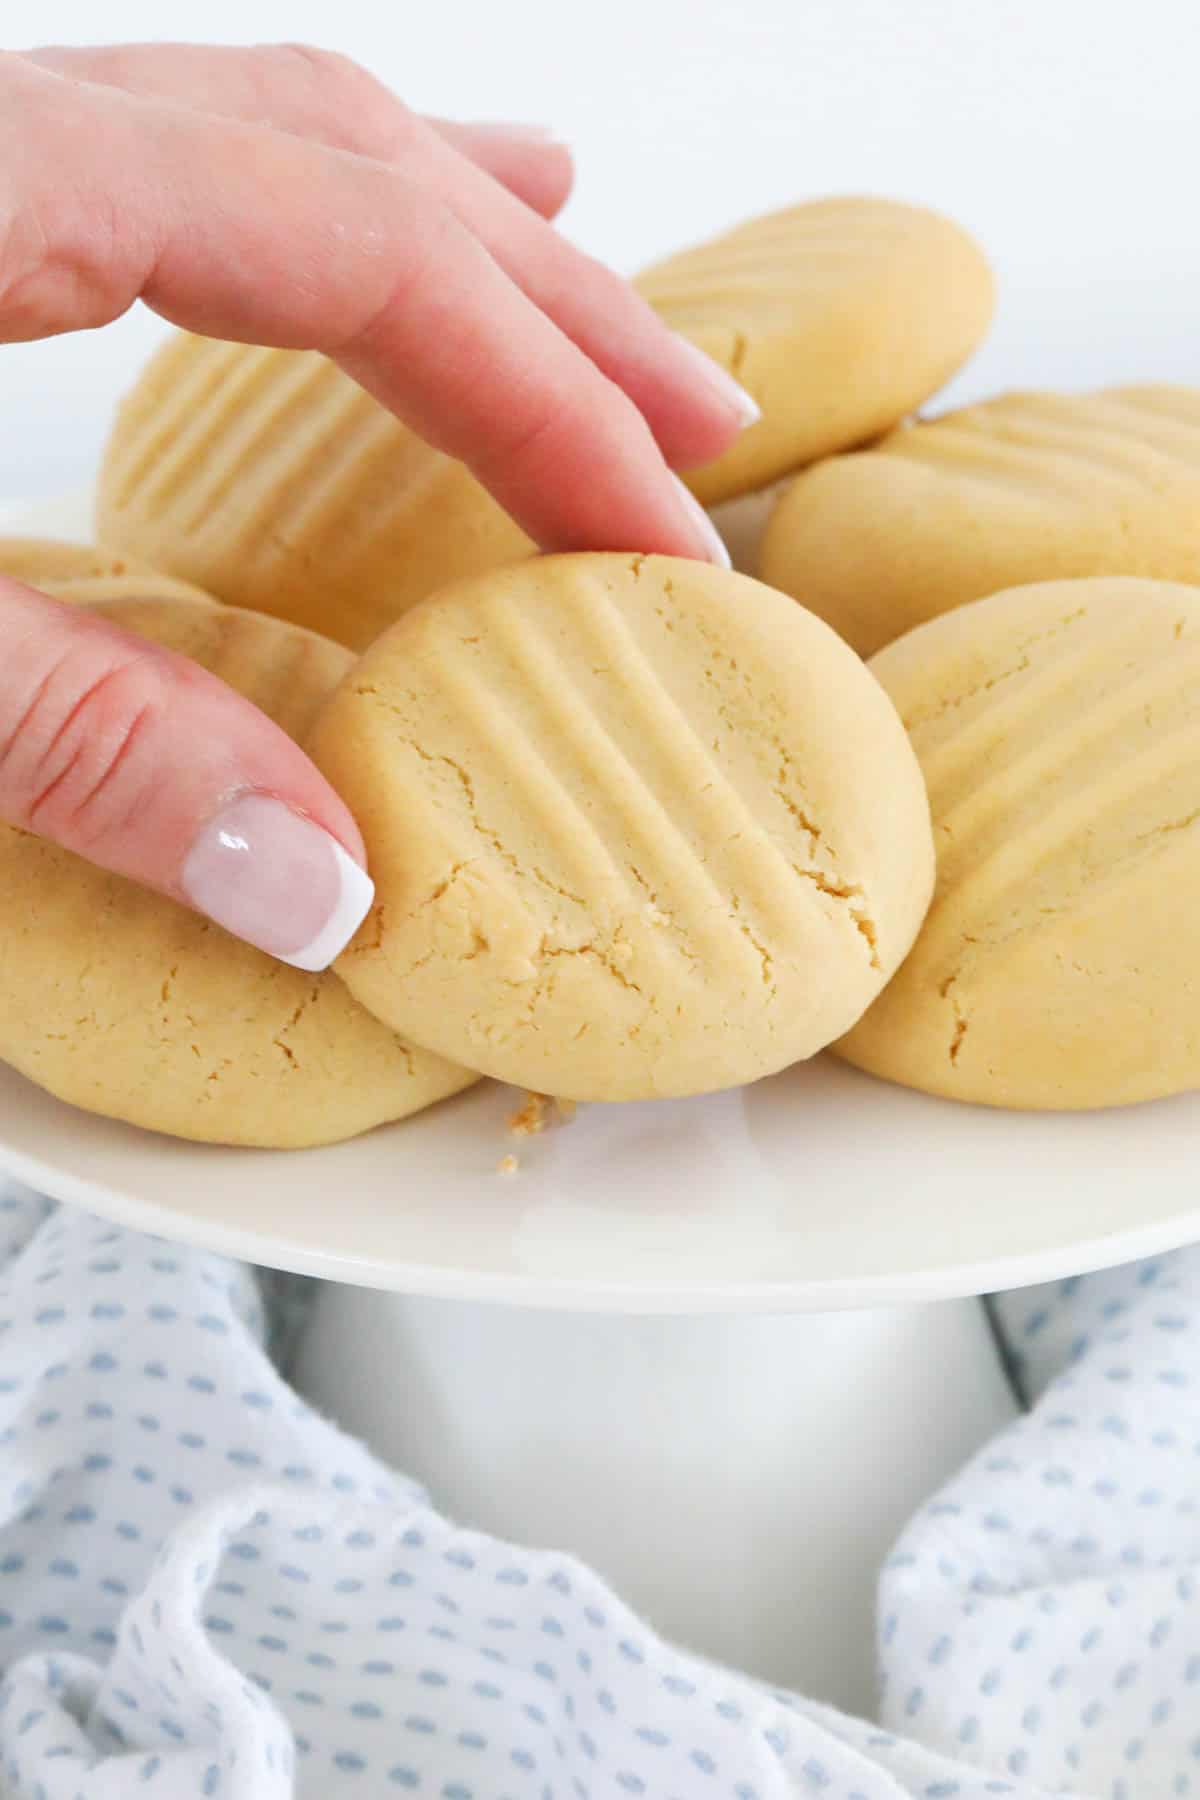 A hand reaching out and picking up a golden biscuit from a plate.